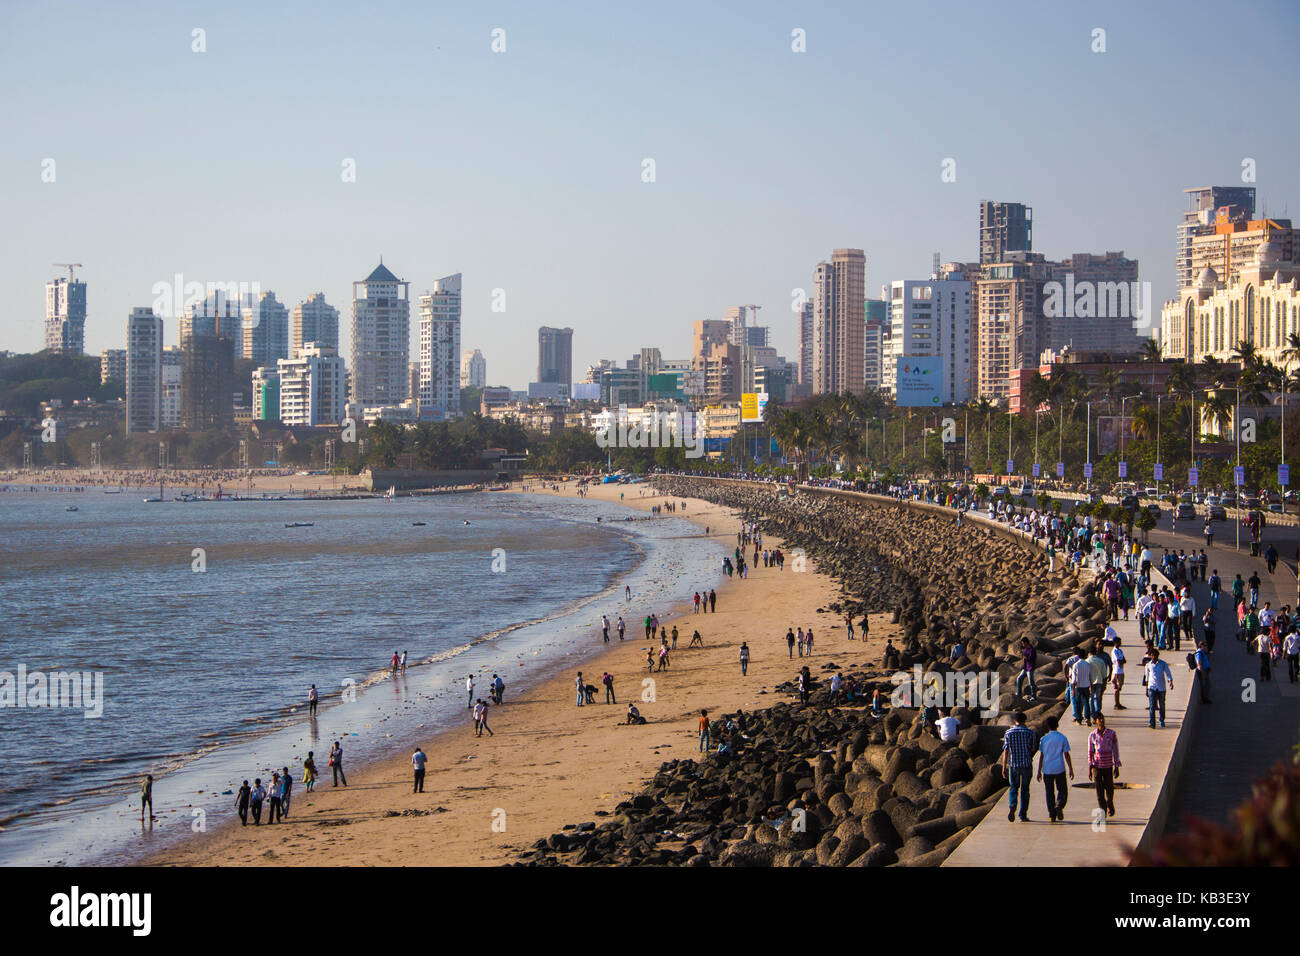 L'Inde, Bombay, seaface chowpatty, Marine Drive, Skyline Banque D'Images